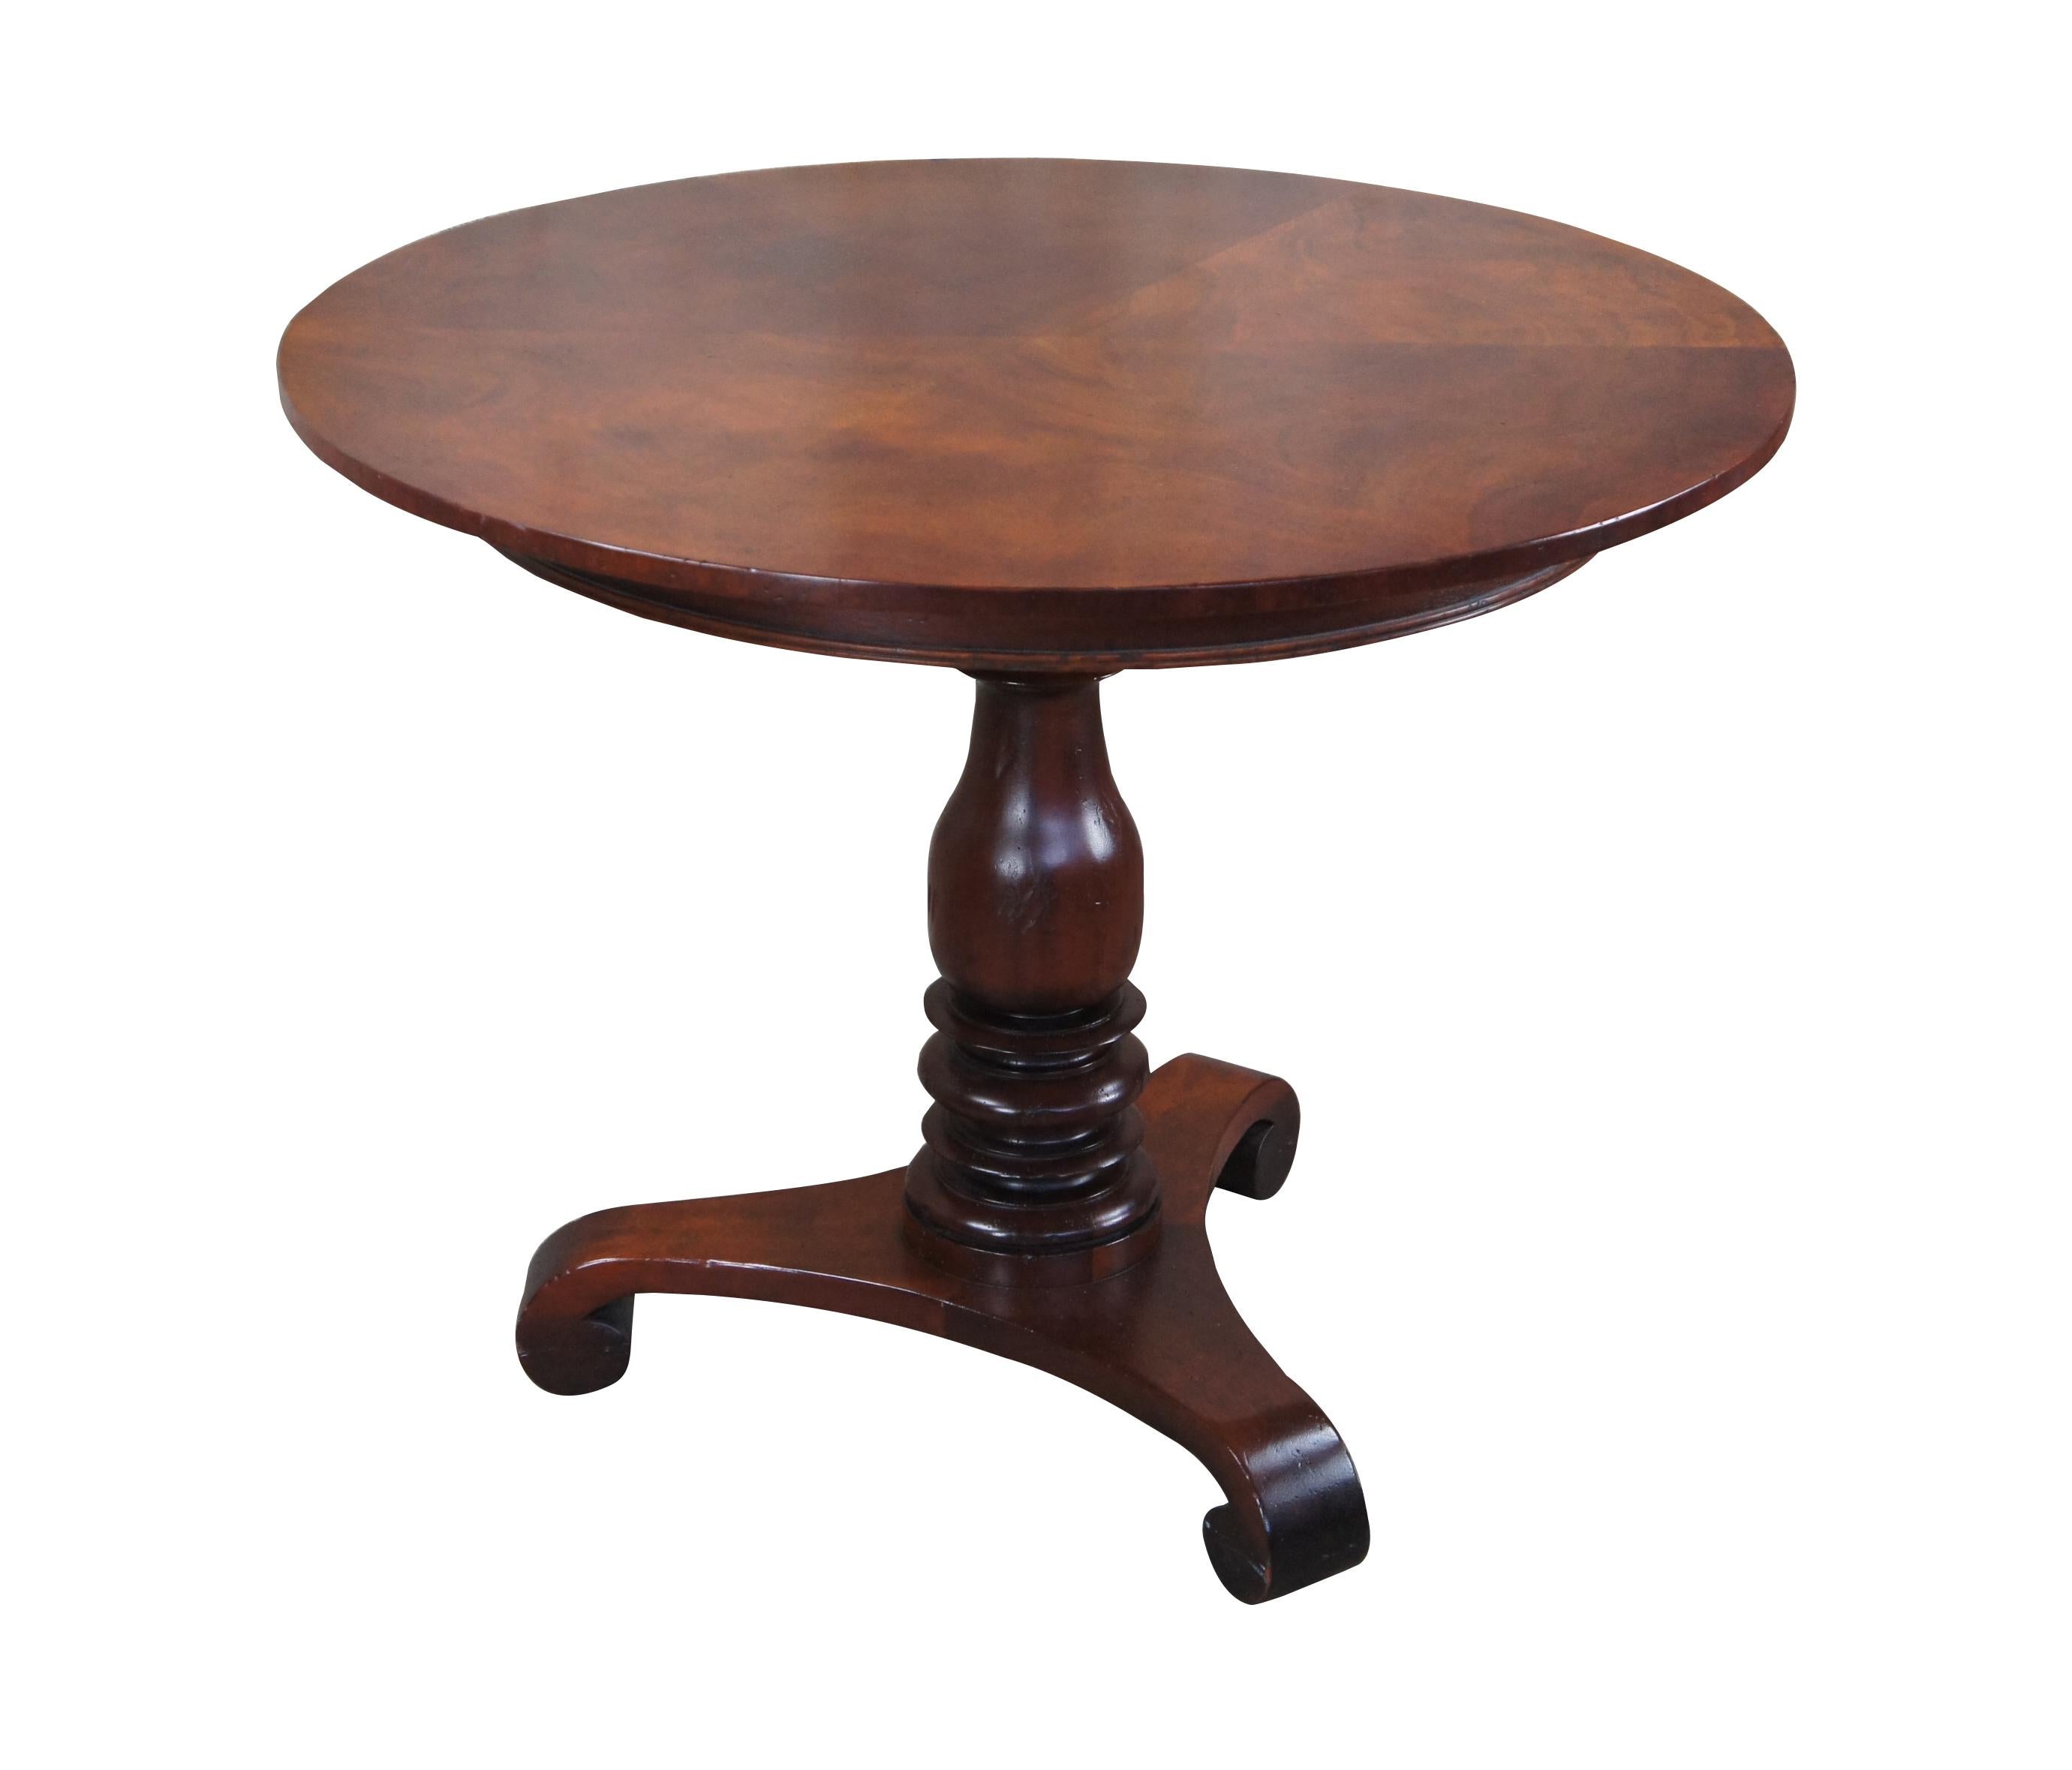 Vintage Baker Furniture Milling Road Collection American Empire style center table, circa 1980s.  Made of mahogany featuring round form with pie matchbook top, turned baluster column and scrolled tri foot base. 

Dimensions:
36